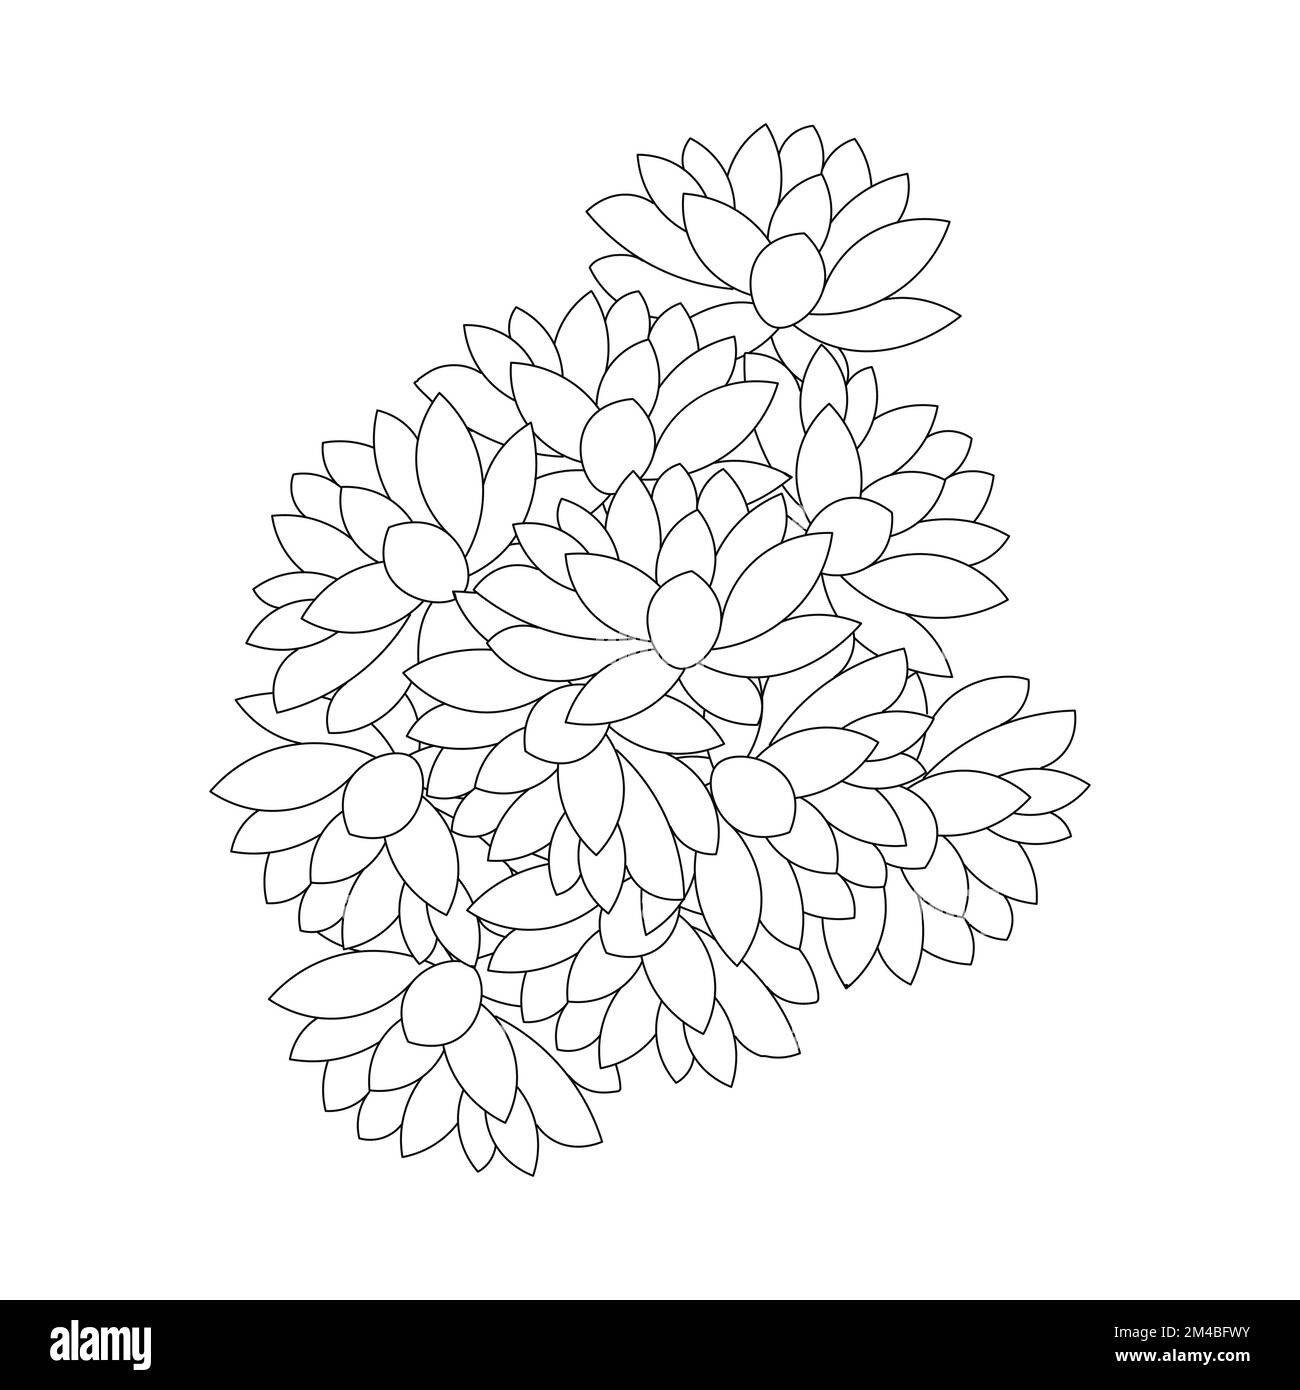 lotus flower coloring page of simplicity artistic drawn with blossom flower on isolated background Stock Vector